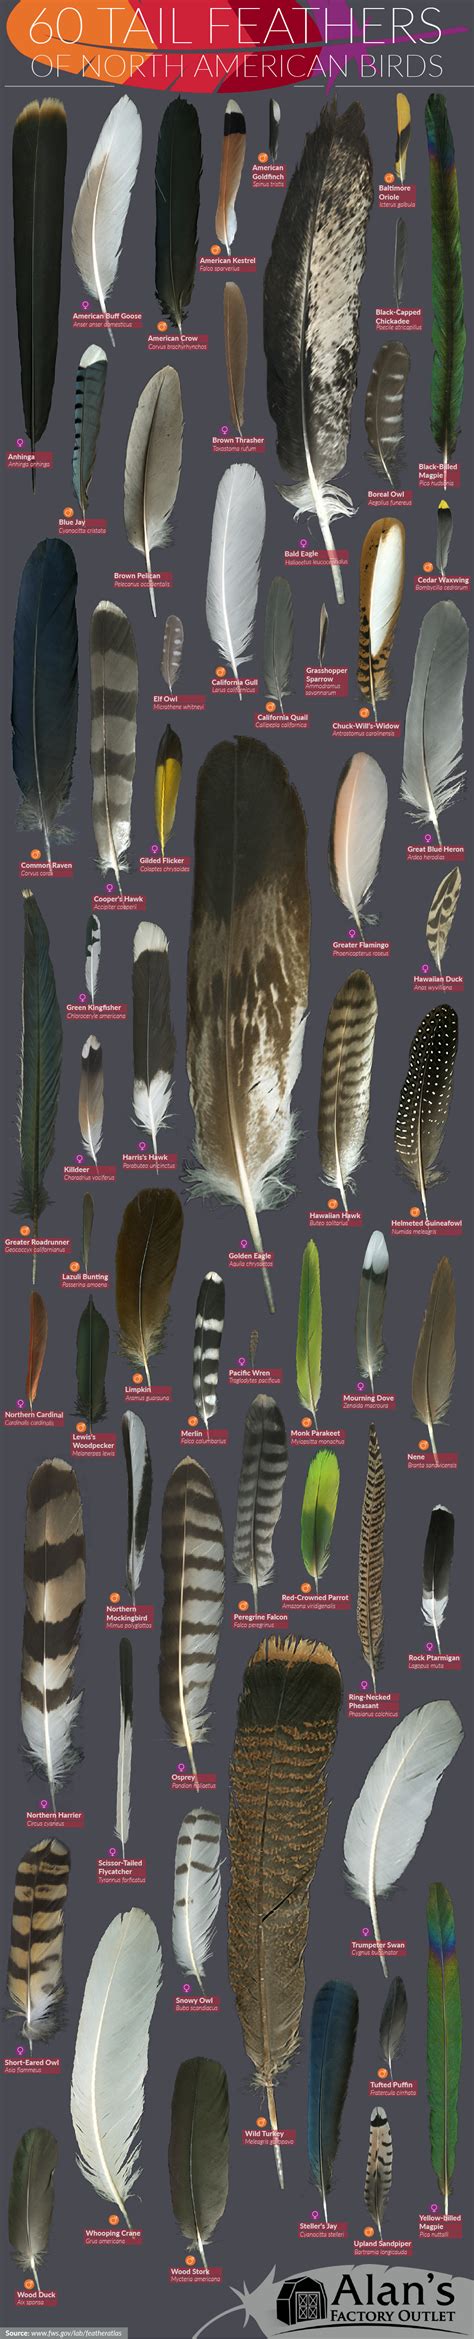 Golden Eagle Feather Identification